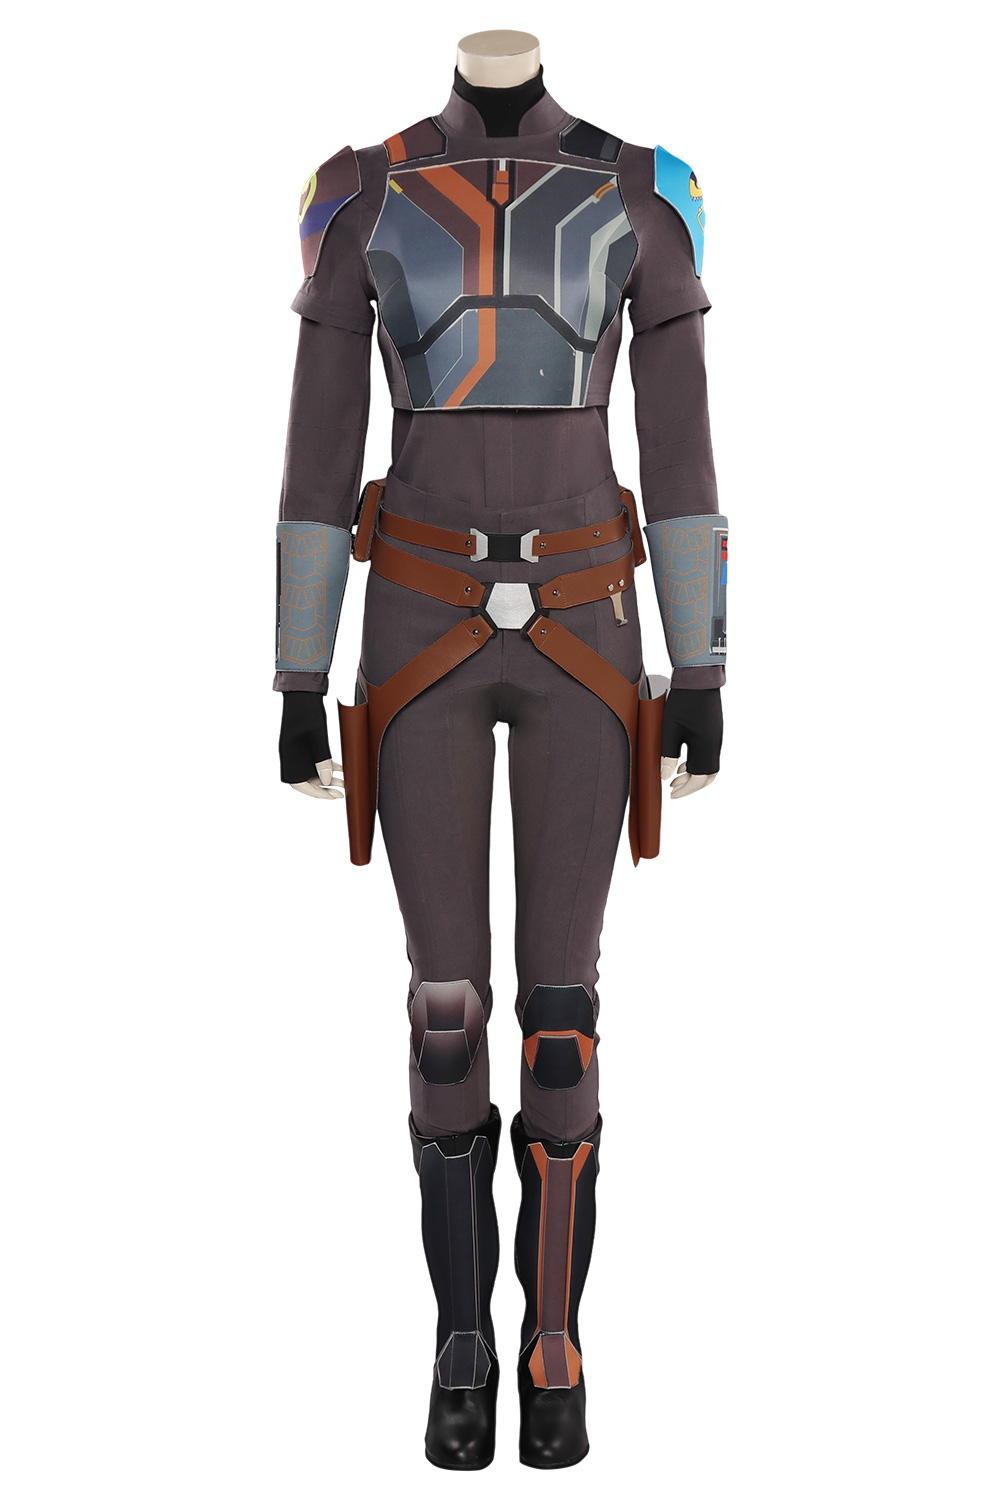 Movie Star Wars Sabine Wren Outfits Halloween Carnival Suit Cosplay Costume